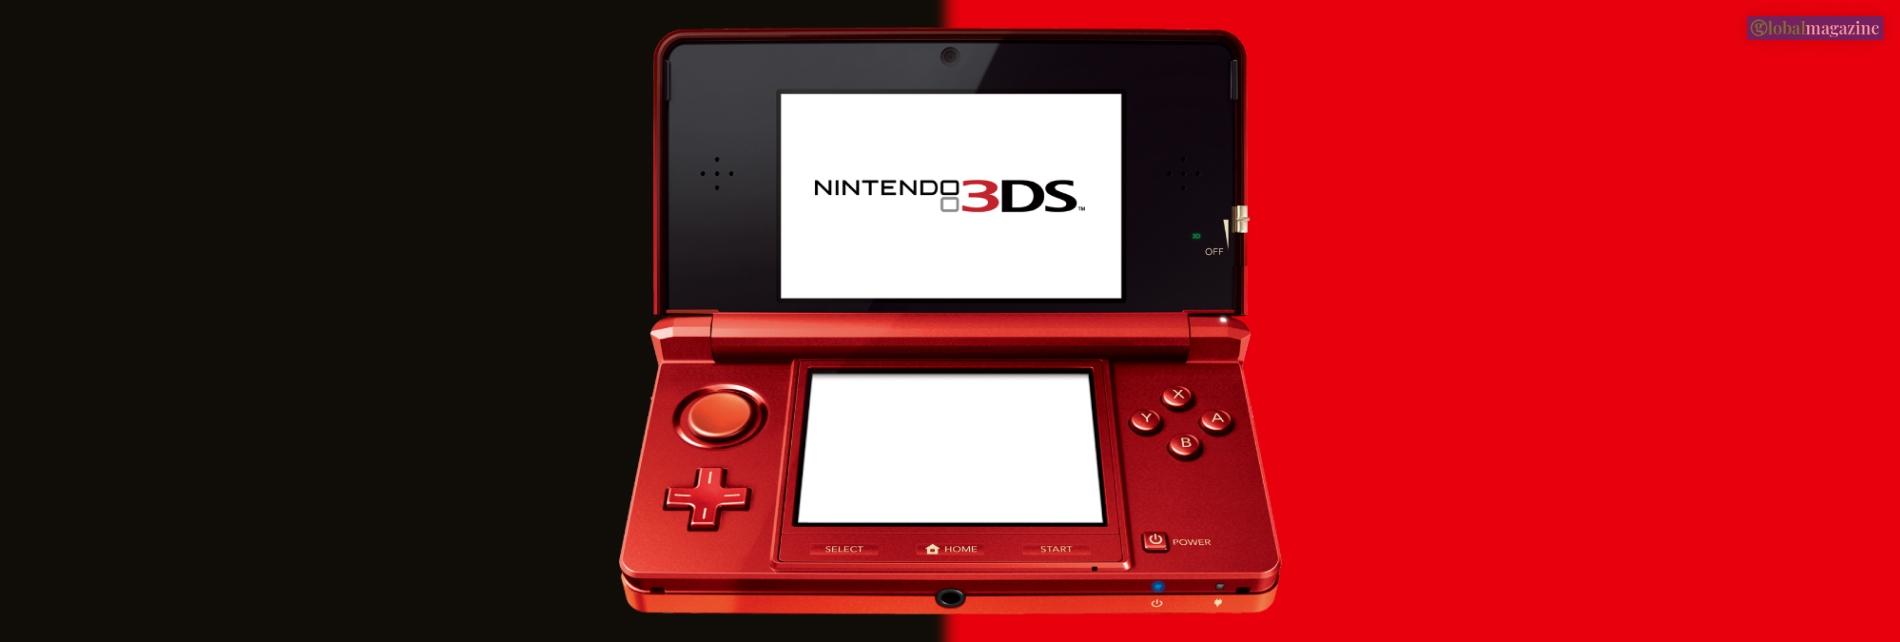 Nintendo 3DS Games Available At jUst $1 On Nintendo Switch